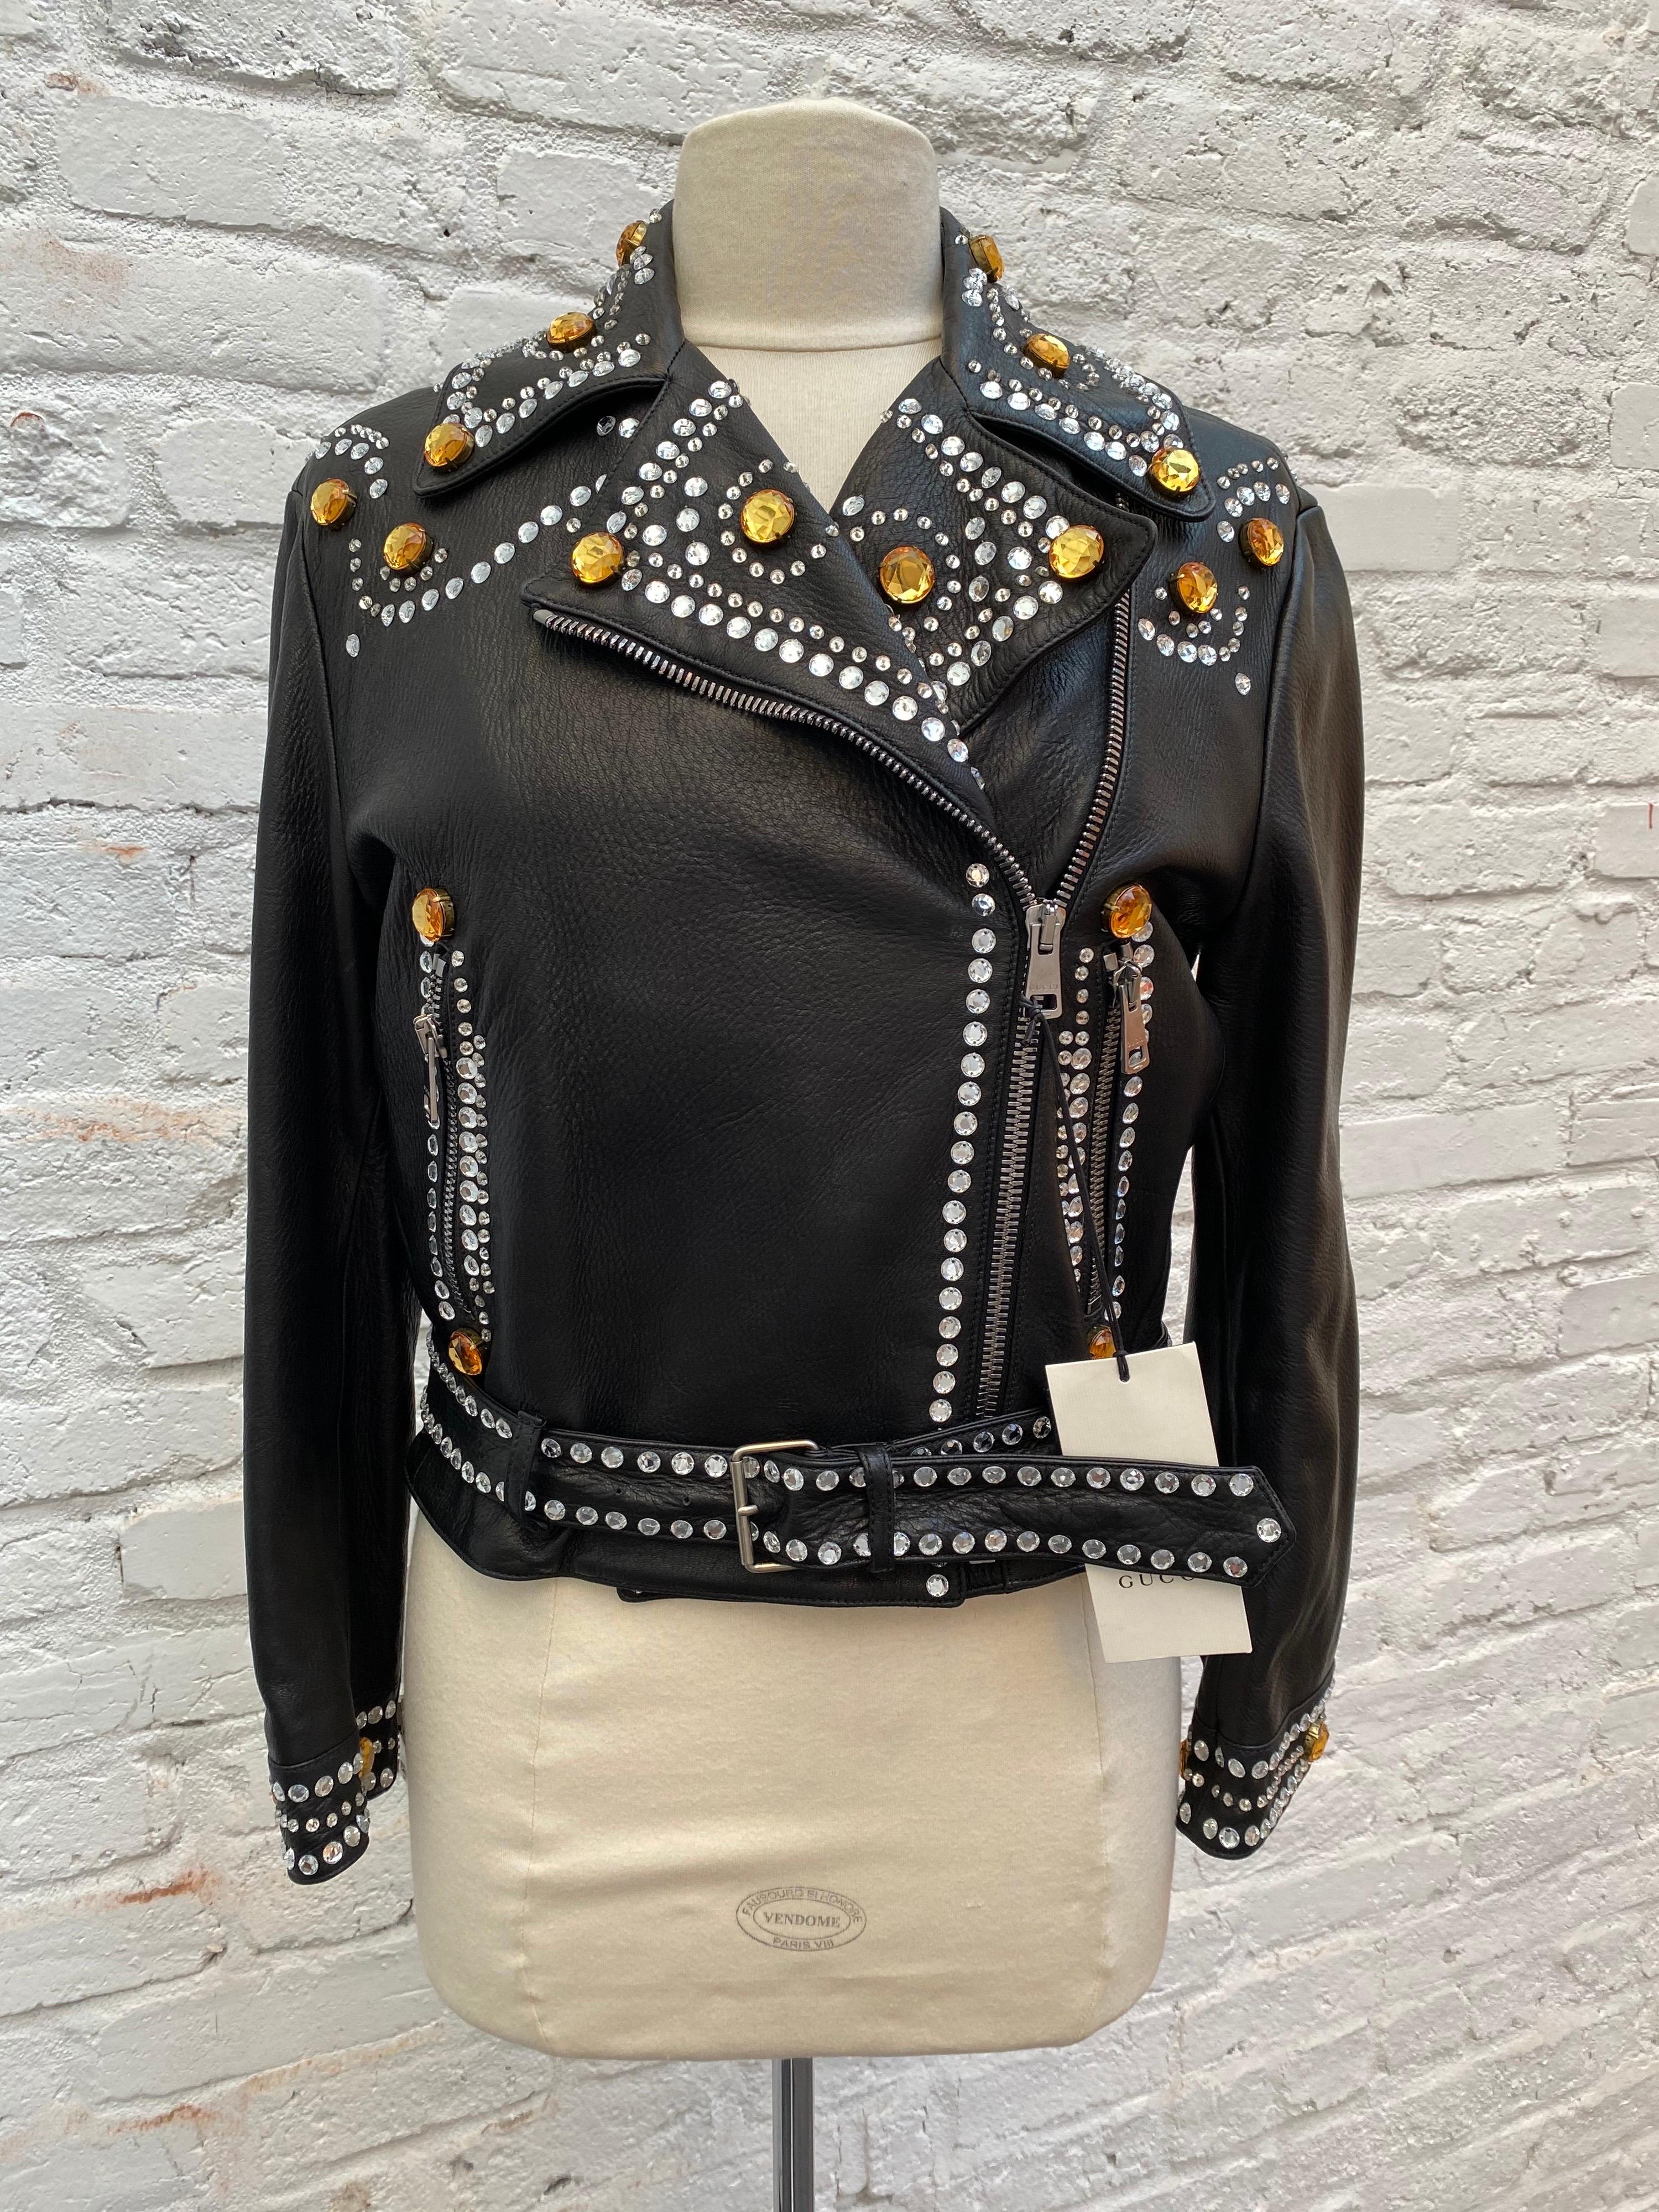 Gucci Black Leather Jacket with Rhinestones. Limited and never worn. With original tags. Size S. Motorcycle style jacket. Guaranteed authentic. 

Measurements
Shoulder to Shoulder: 18